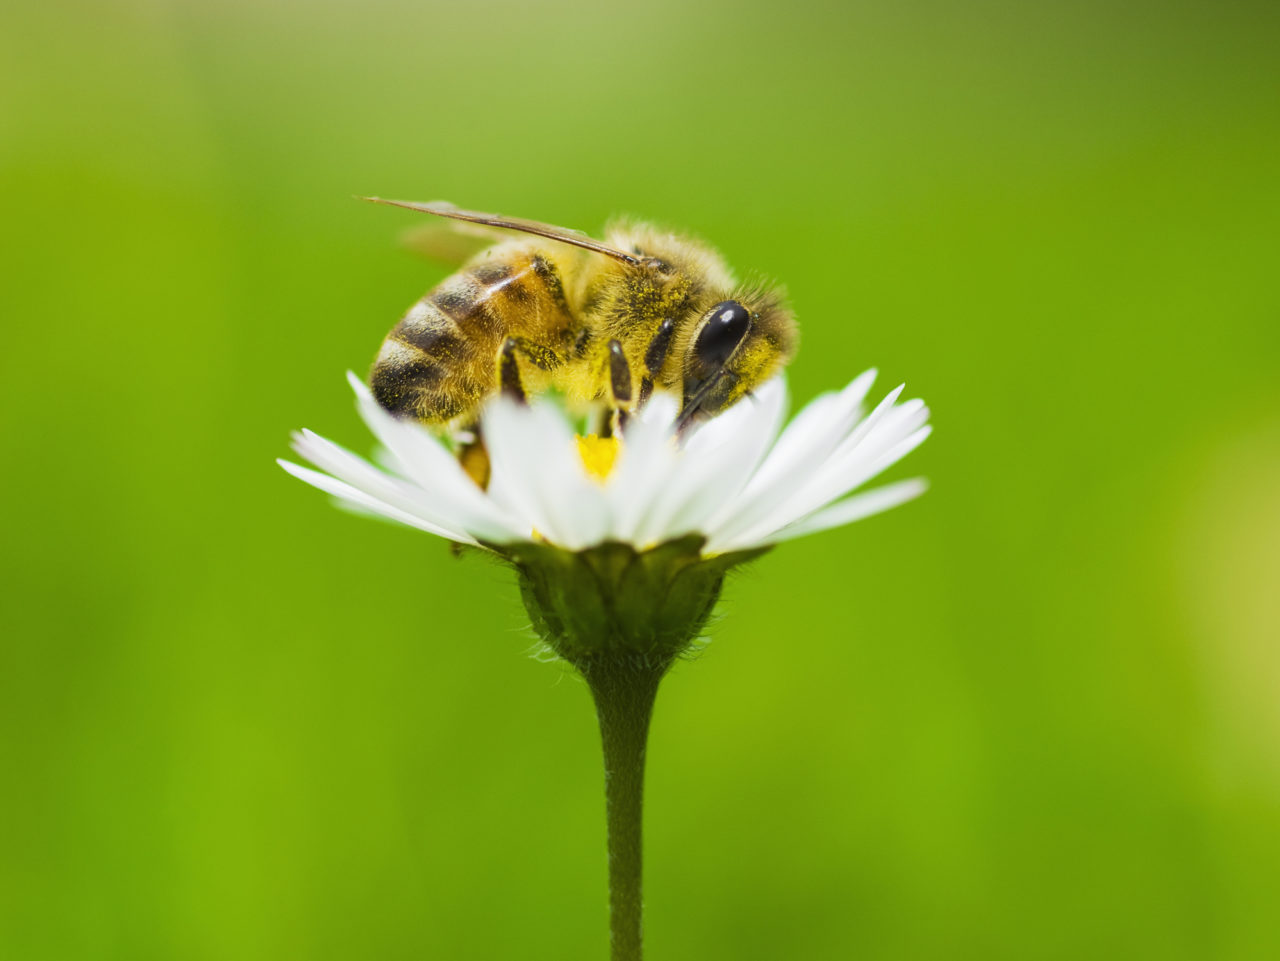 How to Avoid Getting Stung by a Bee This Summer